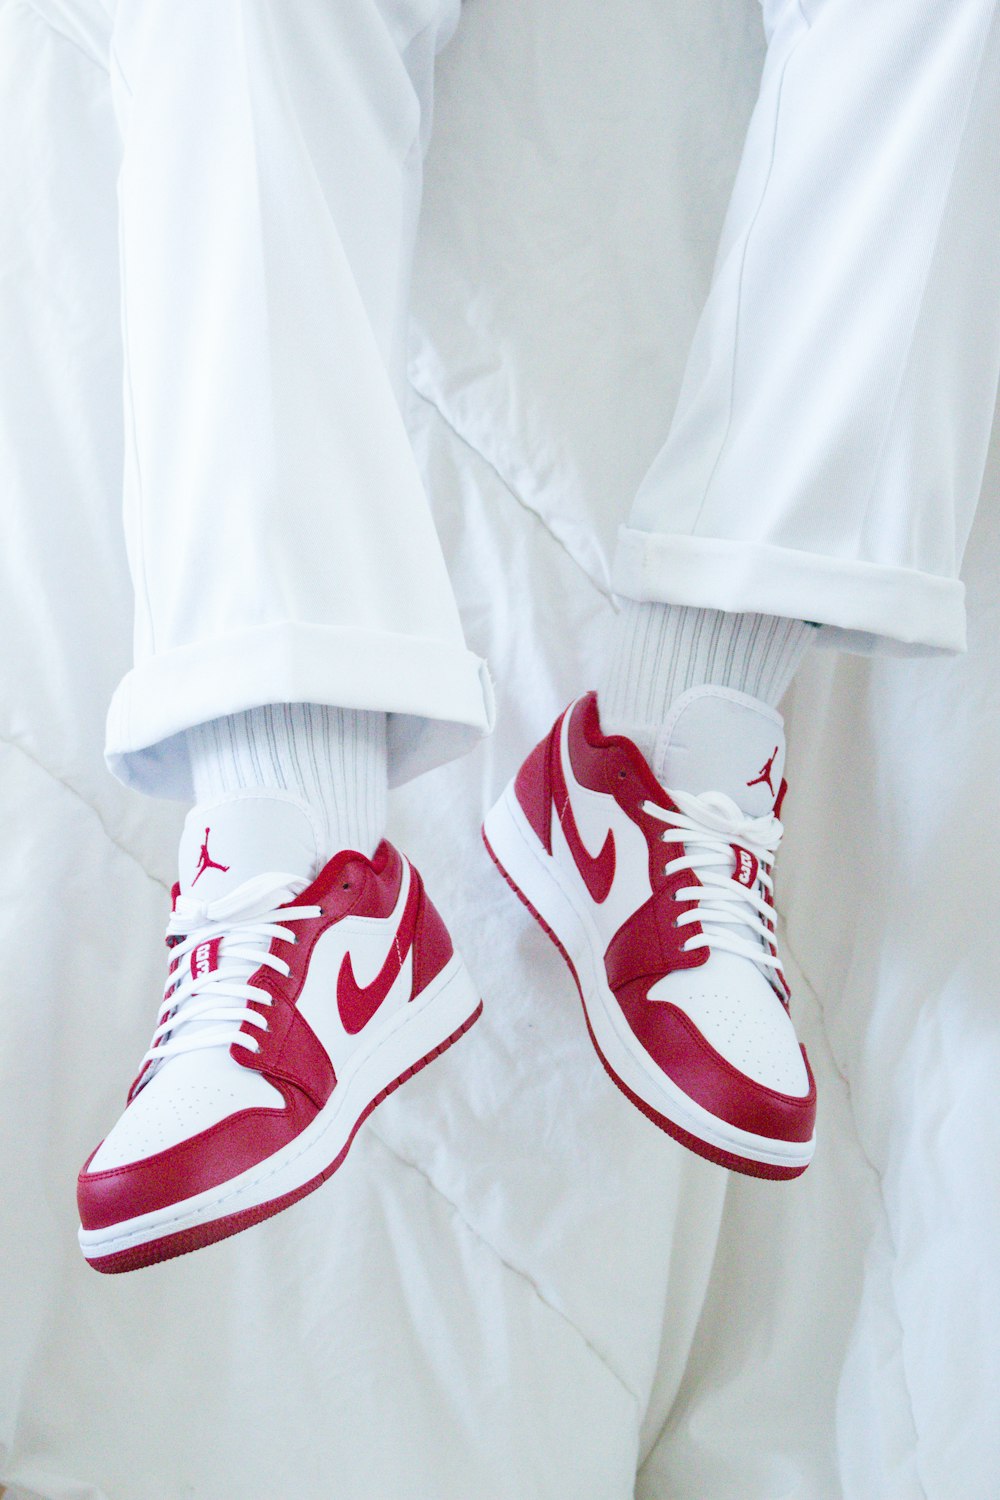 red and white nike sneakers photo – Free Fashion Image on Unsplash